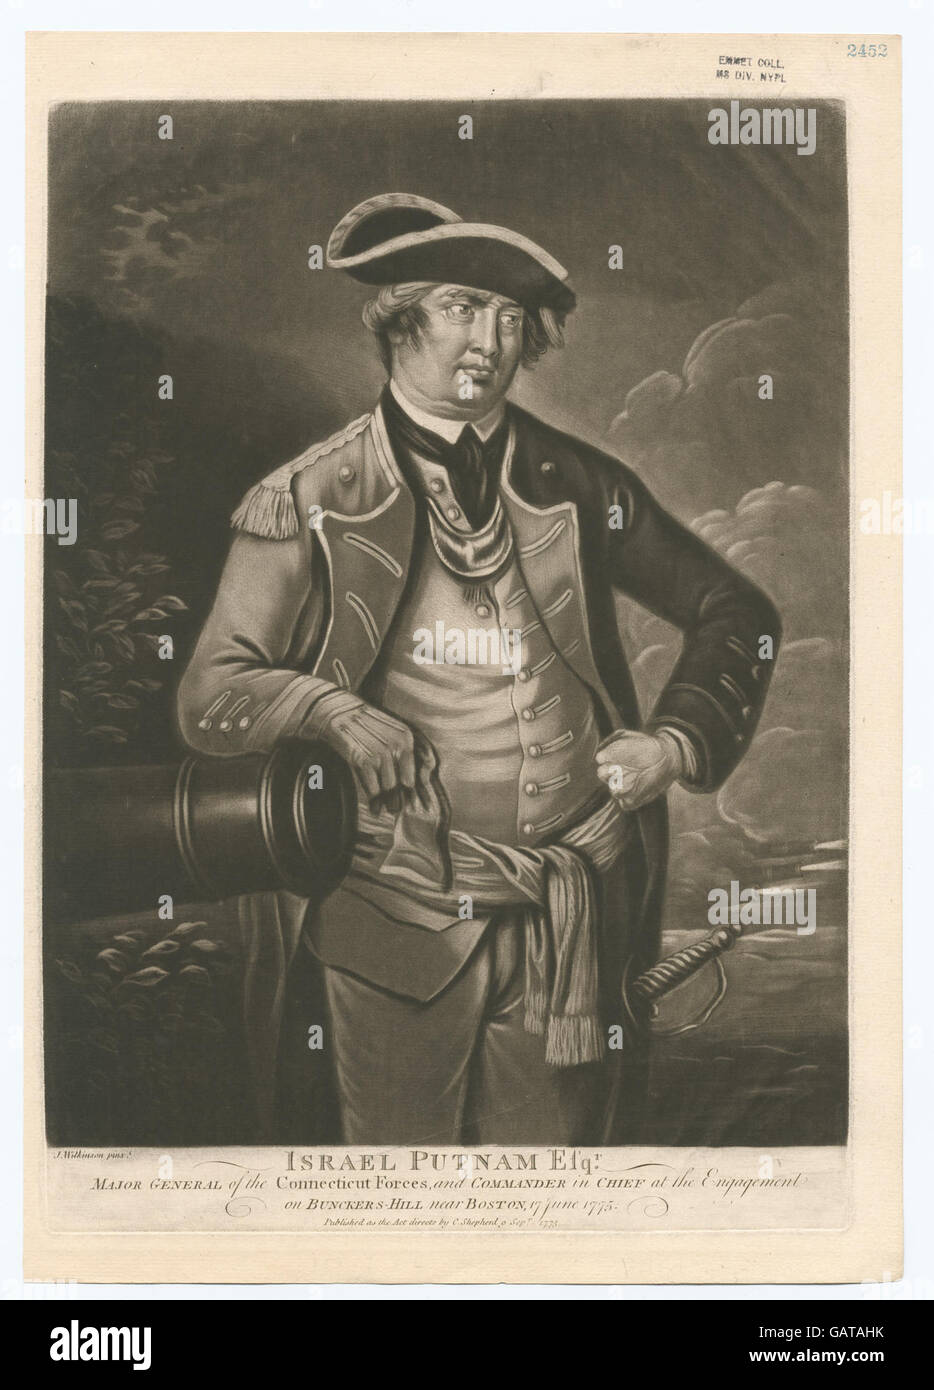 Israel Putnam Esqr., Major General of the Connecticut forces, and Commander in Chief at the engagement on Bunckers-Hill (i.e. Bunker Hill) near Boston, 17 June 1775 ( Hades-254356-478595) Stock Photo